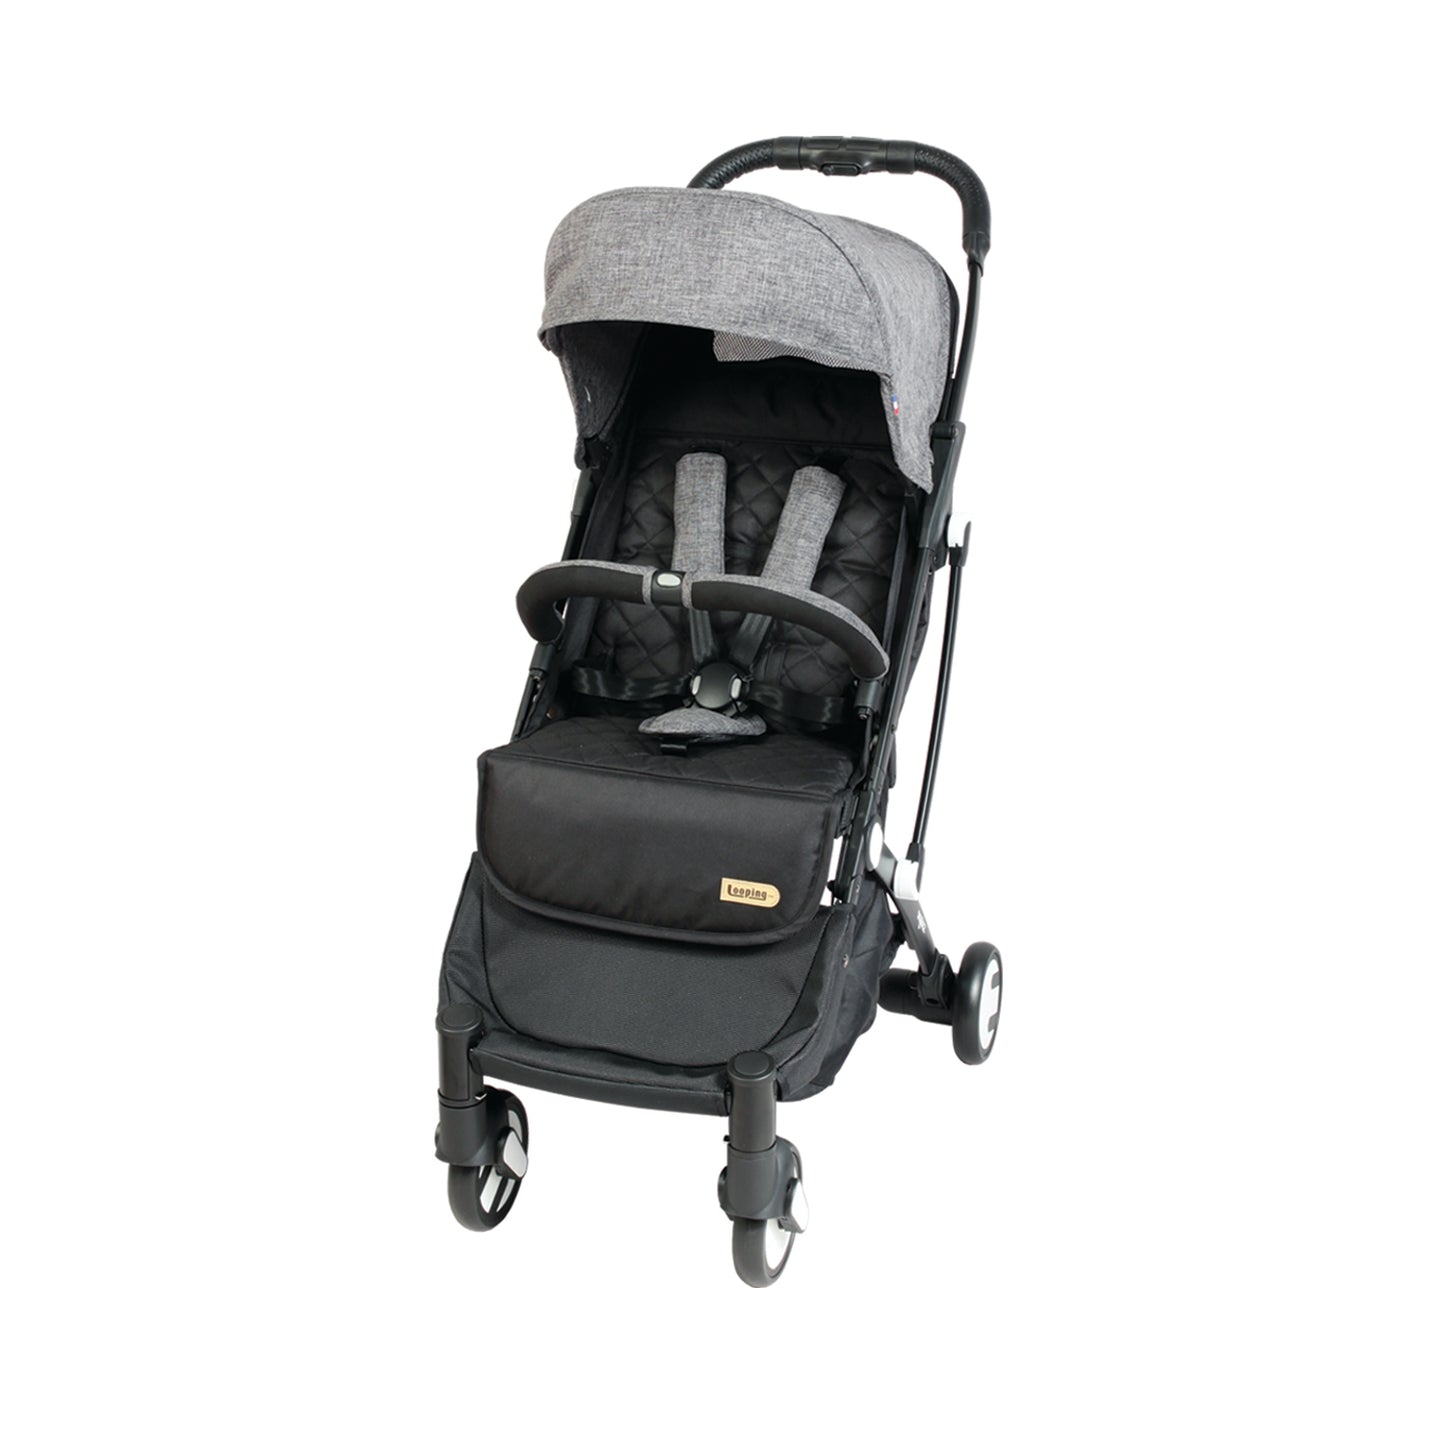 Squizz 3 Compact Stroller Grey Canopy-Black Frame